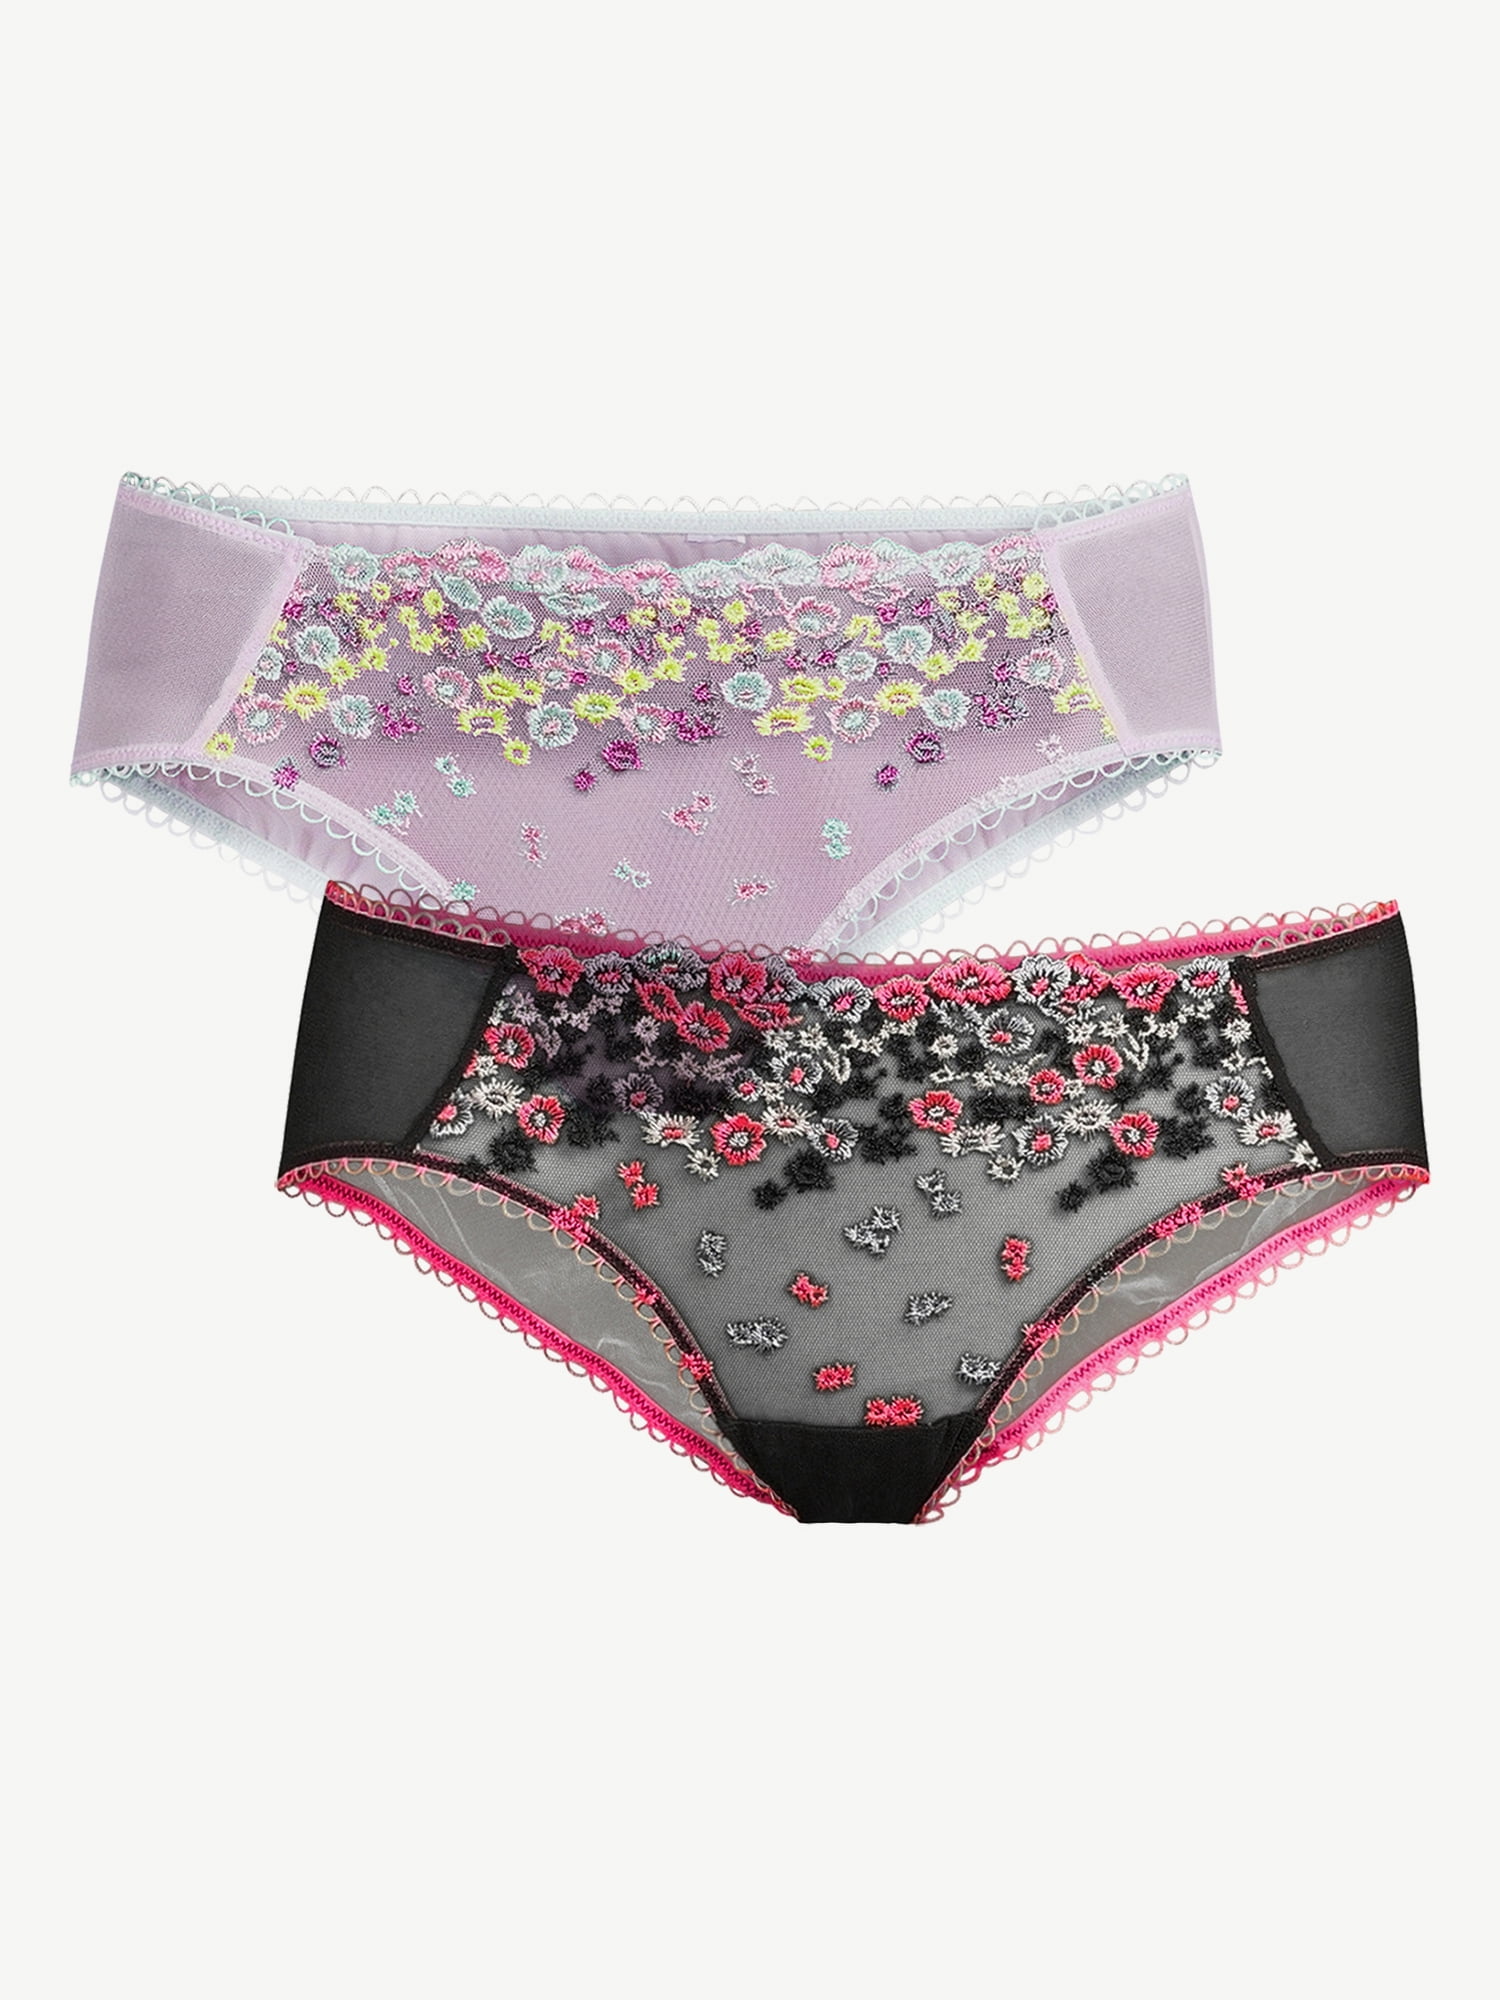 Sofia Intimates by Sofia Vergara Women's Embroidered Cheeky Panties, 2-Pack  